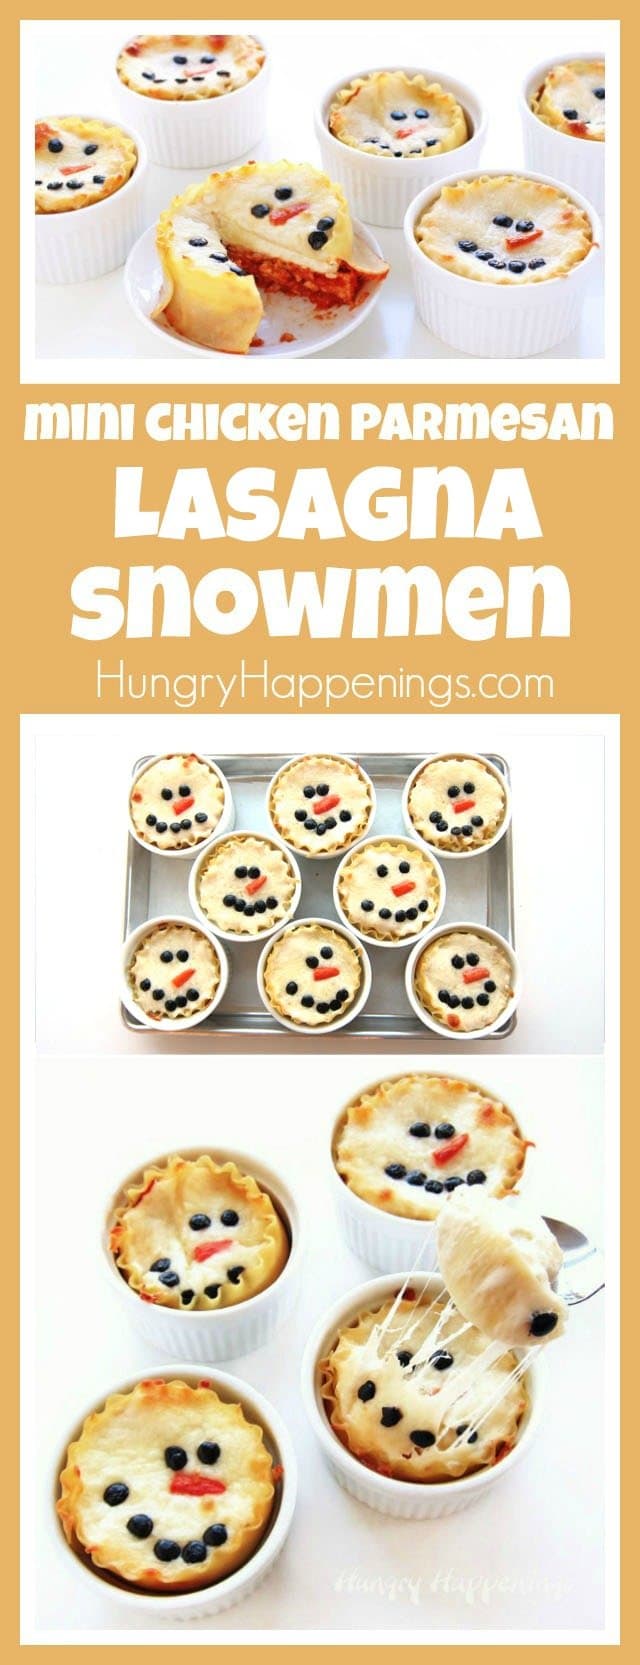 These cute Mini Chicken Parmesan Lasagna Snowmen will warm your heart and keep your belly full this winter. Each individual serving size meal will add a festive touch to your Christmas celebrations.